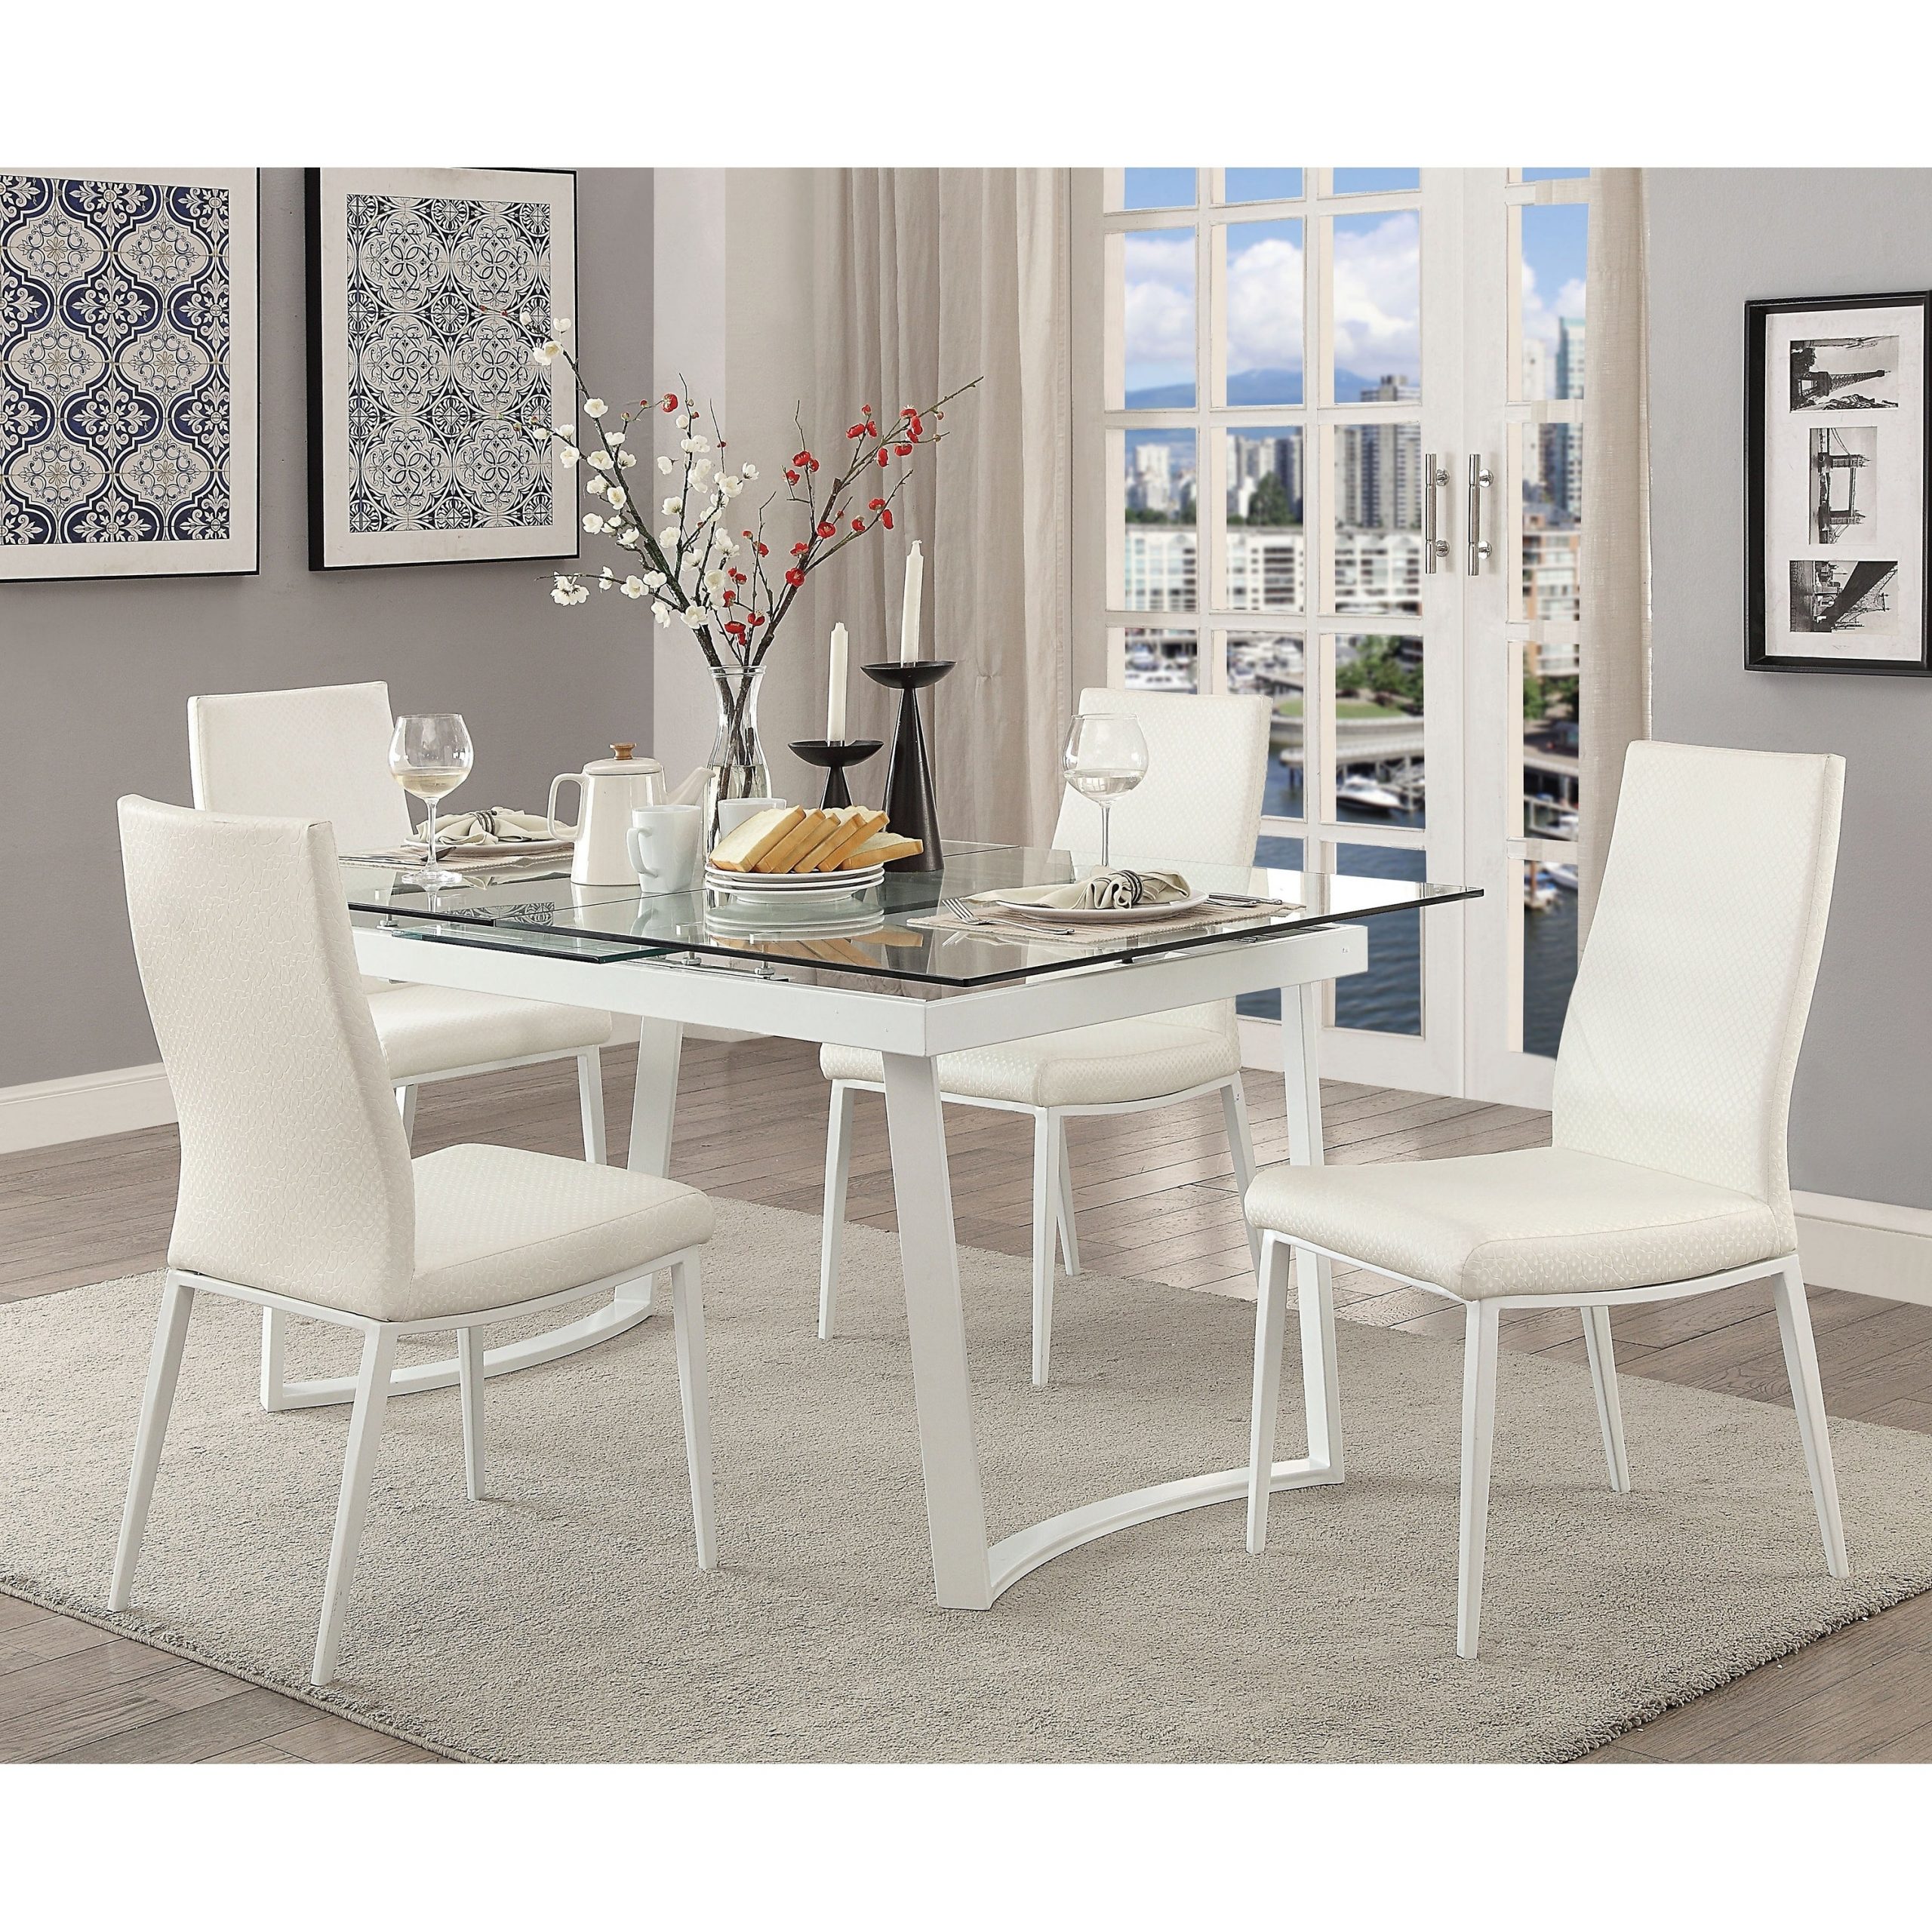 Furniture Of America Viva Contemporary White 5 Piece Dining Table Set within sizing 3000 X 3000